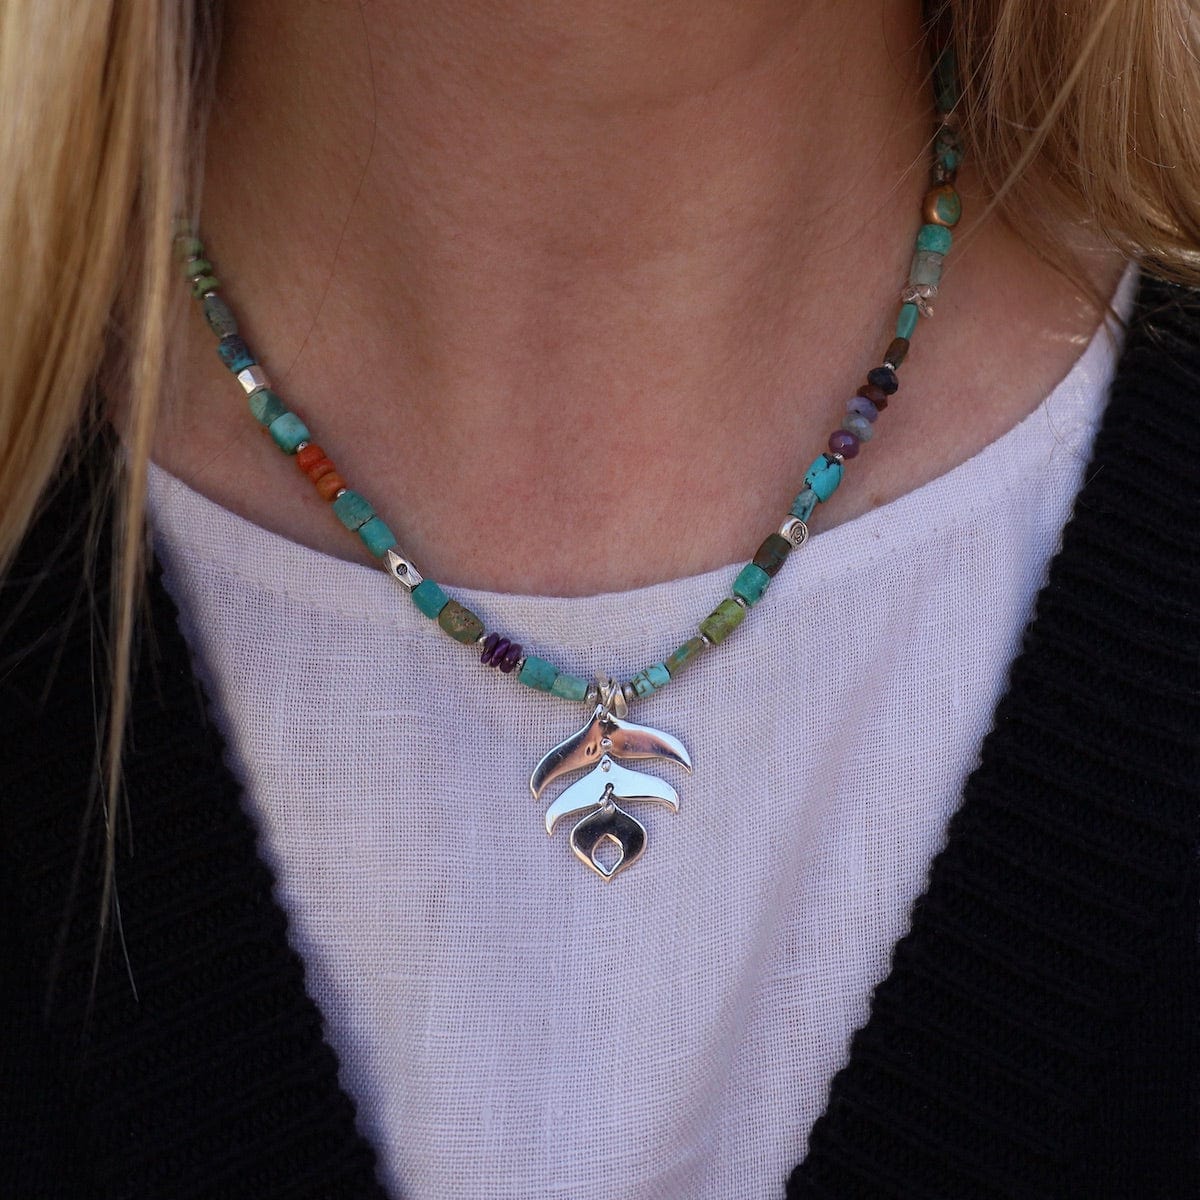 NKL Chunky Turquoise with Silver Peacock Feather Necklace